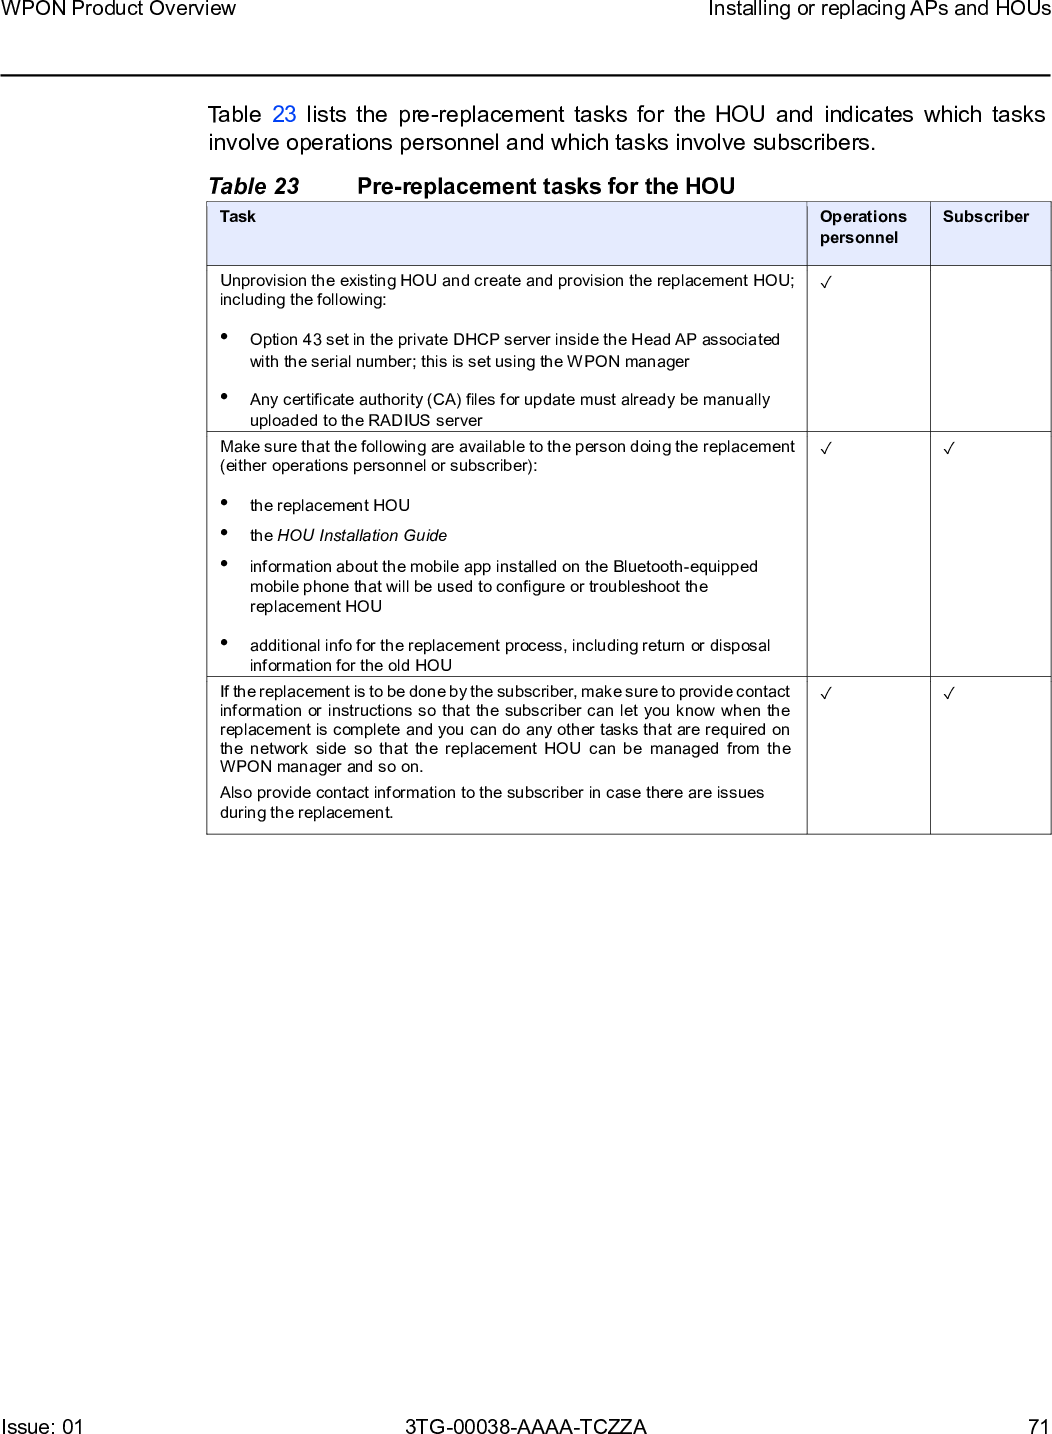 Page 71 of Nokia Bell 7577WPONAPDC WPON User Manual WPON Product Overview